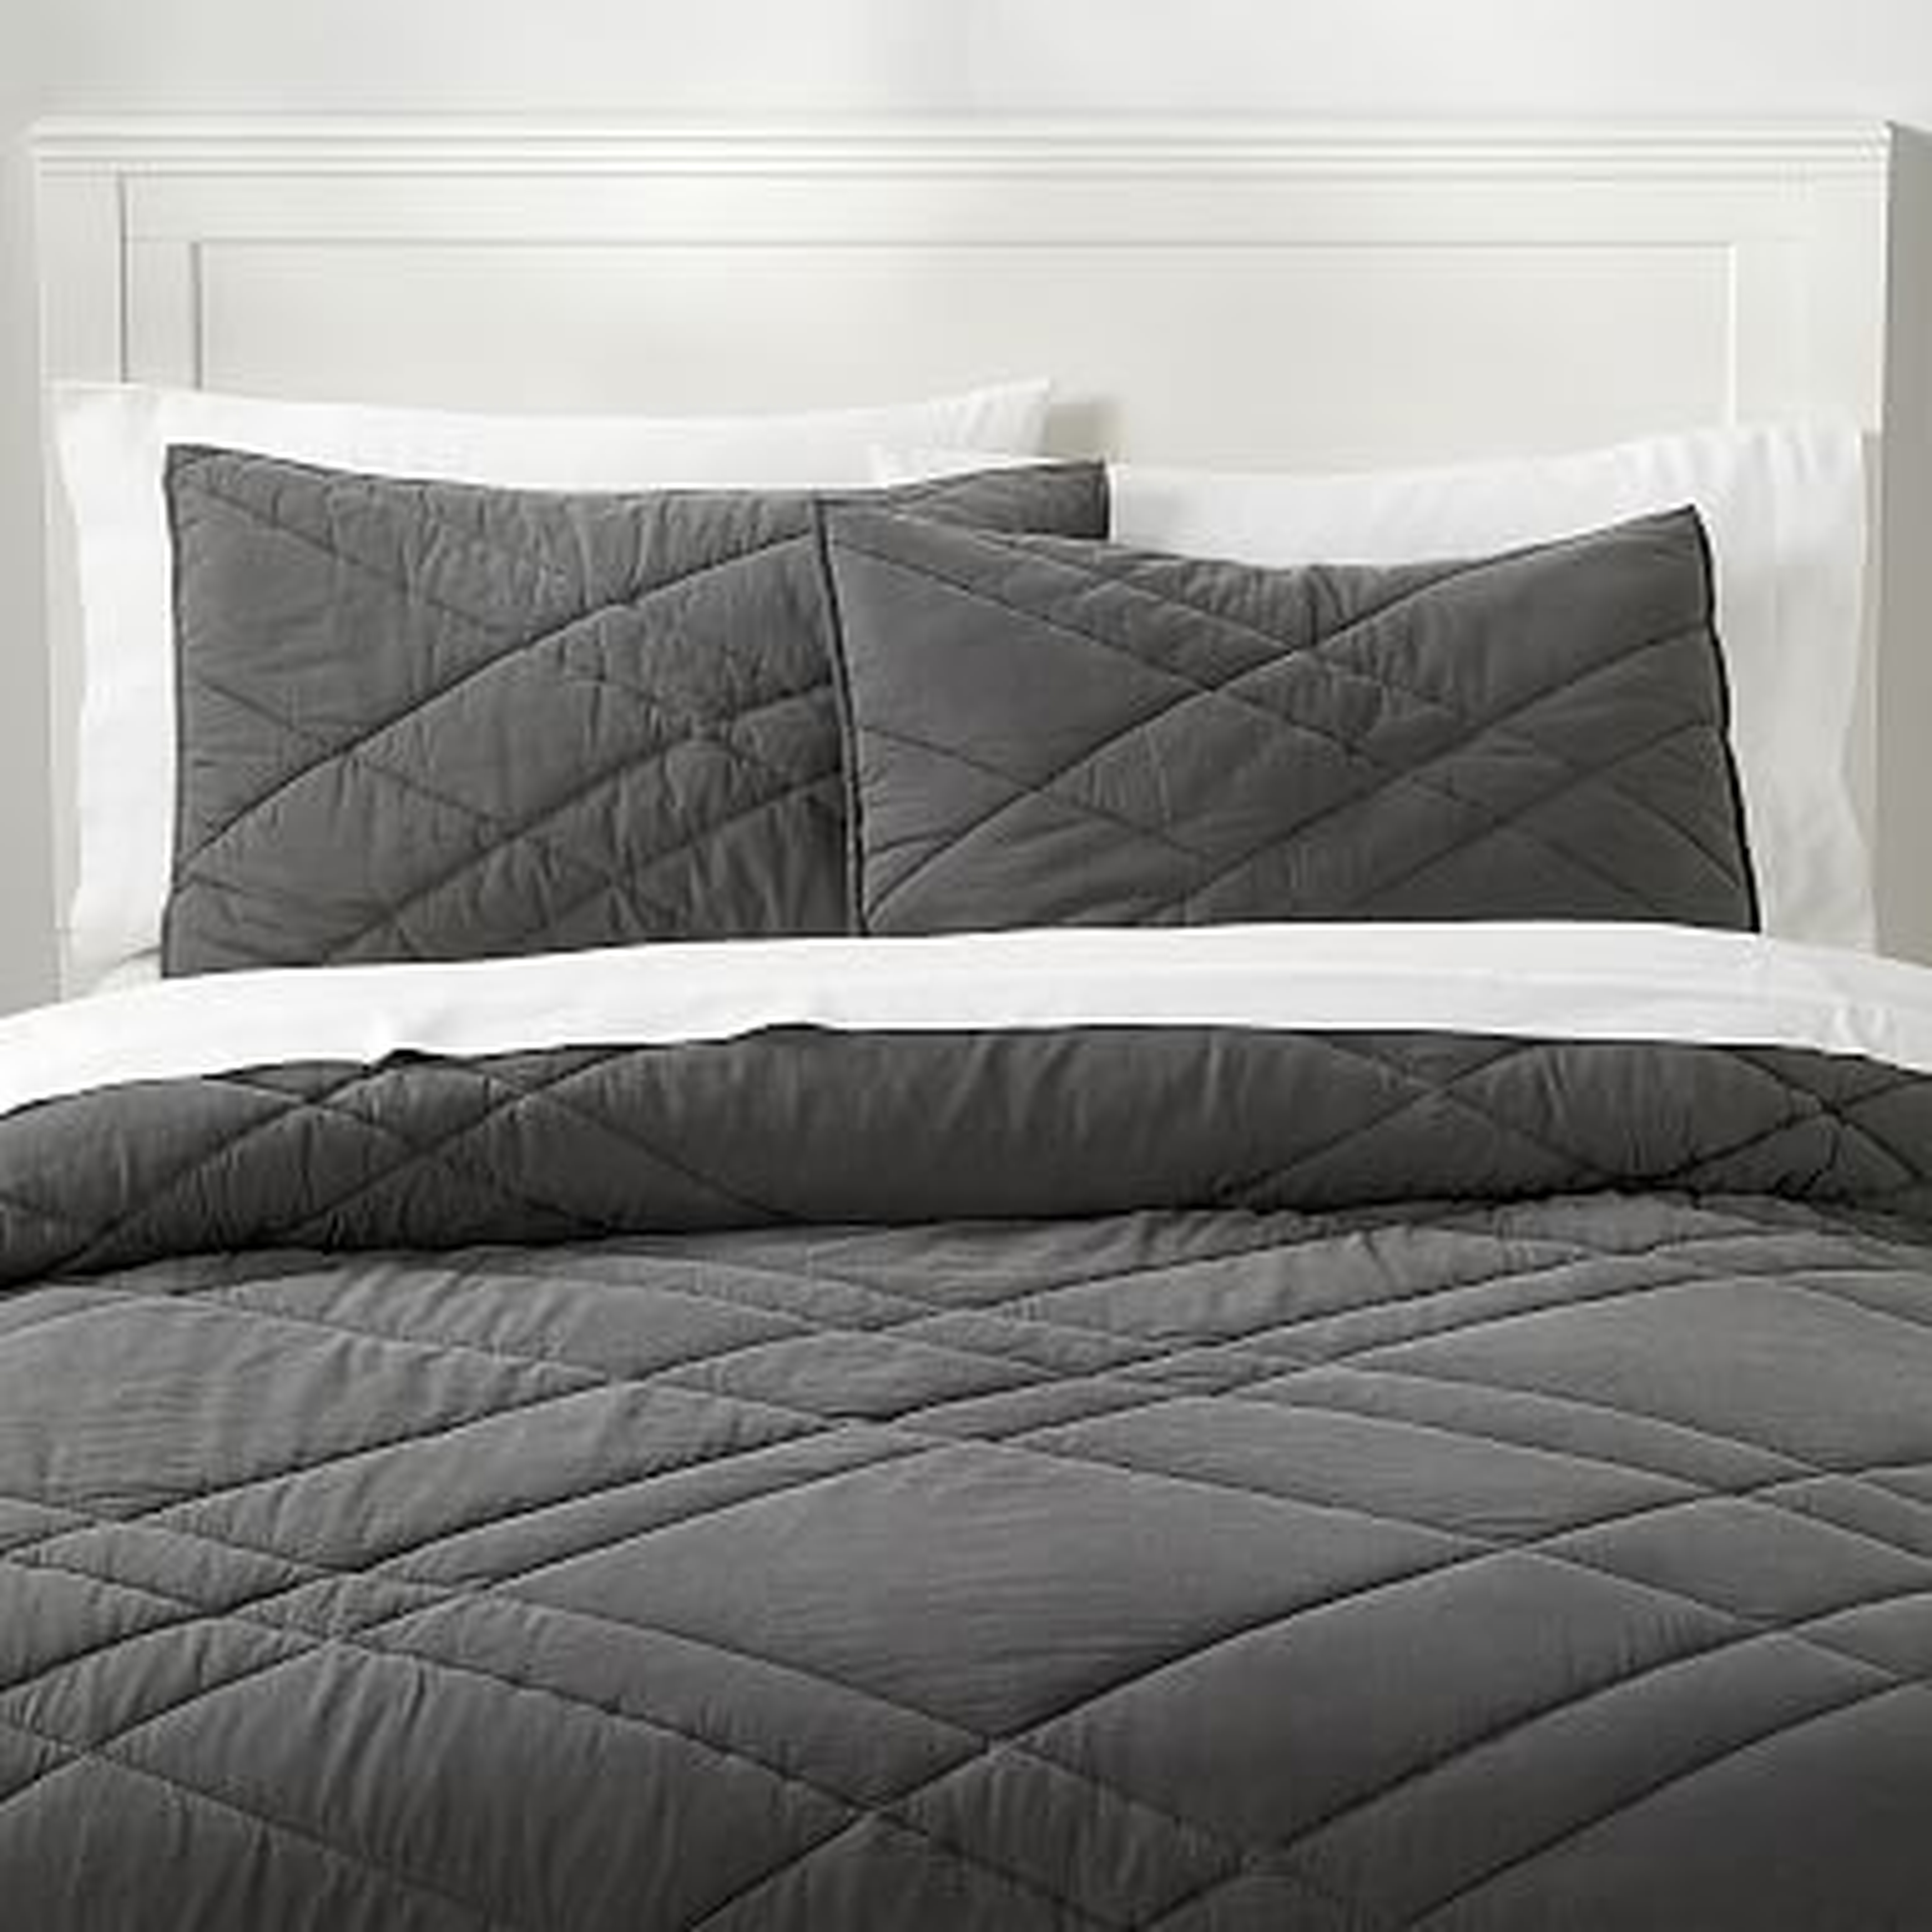 Ryder Rugged Quilt, Full/Queen, Faded Black - Pottery Barn Teen